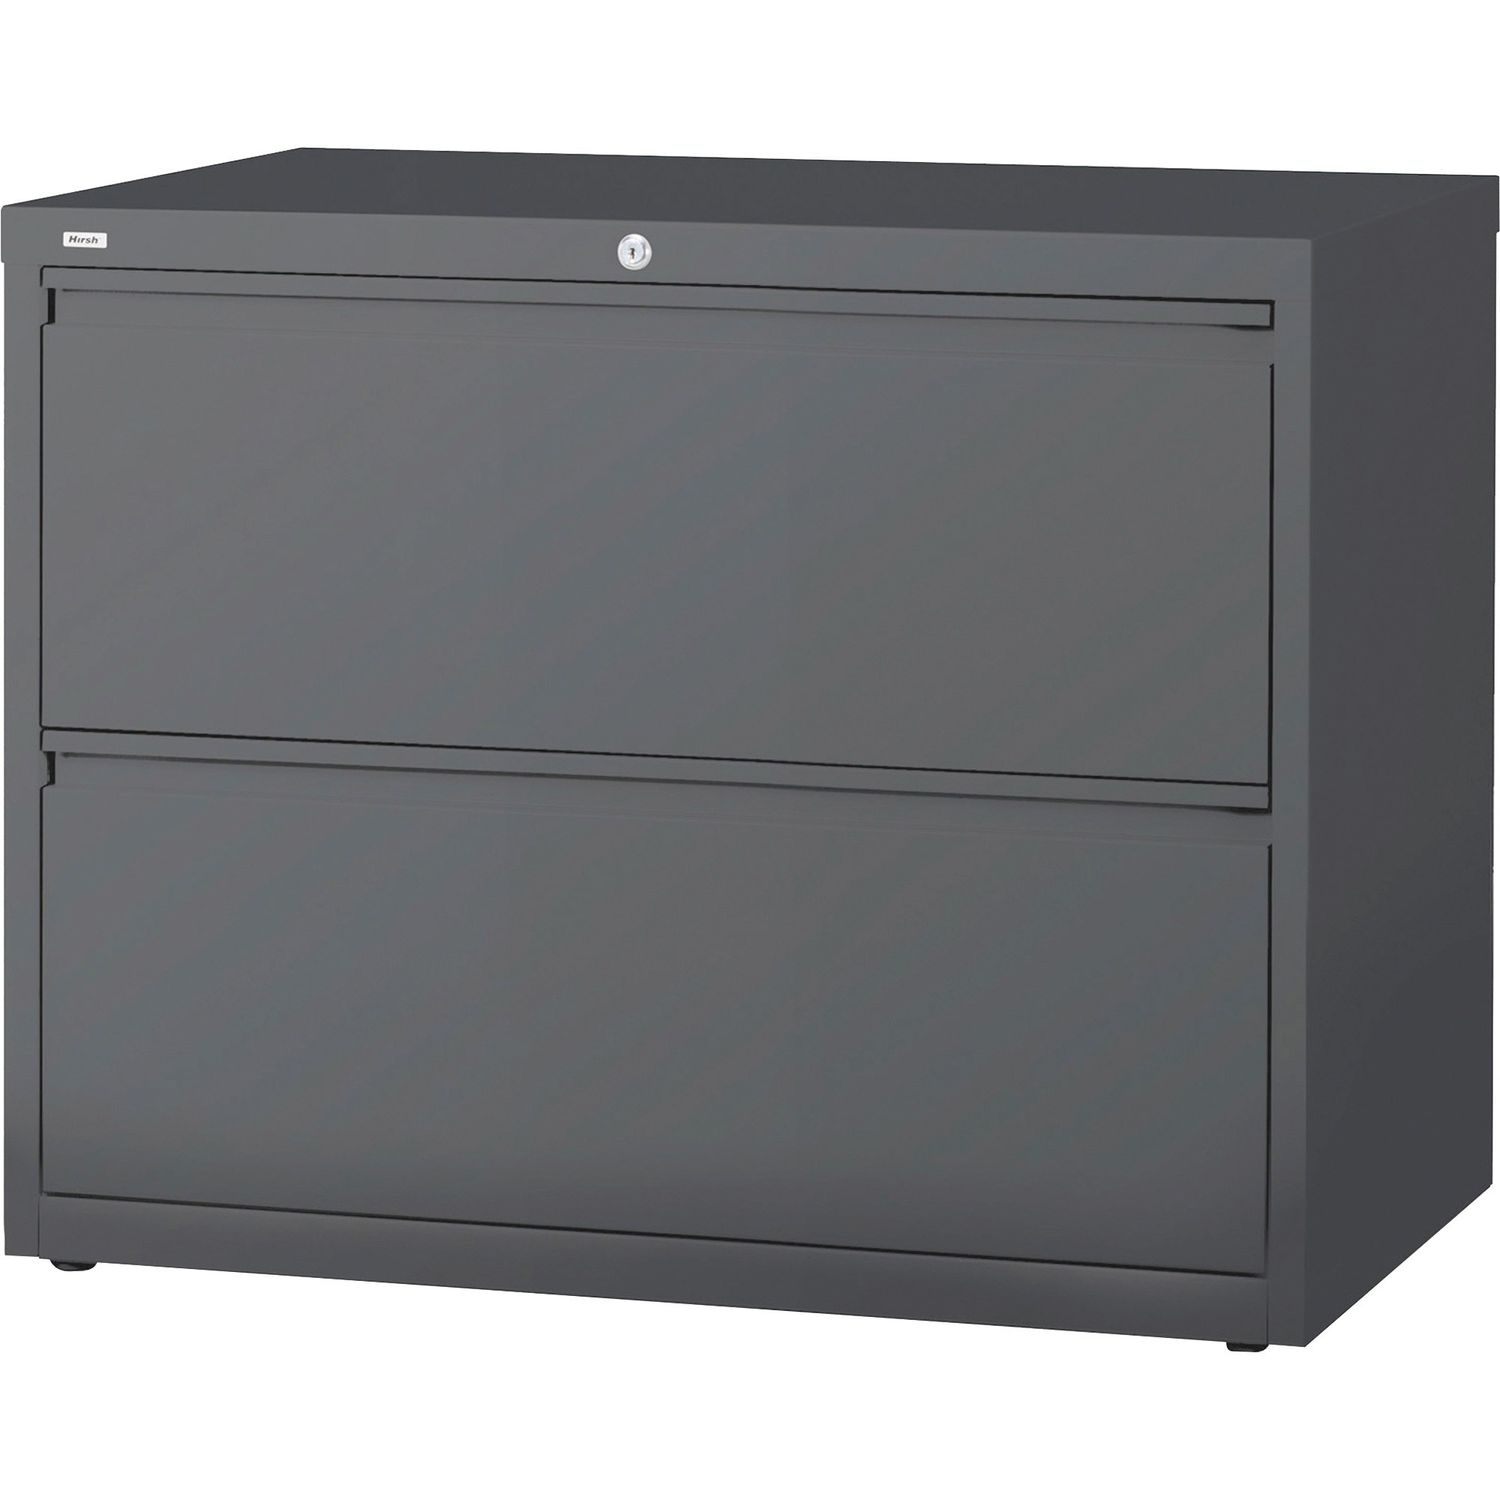 Charcoal Lateral File - 2-Drawer 36" x 18.6" x 28.1", 2 x Drawer(s) for File, Letter, Legal, A4, Lateral